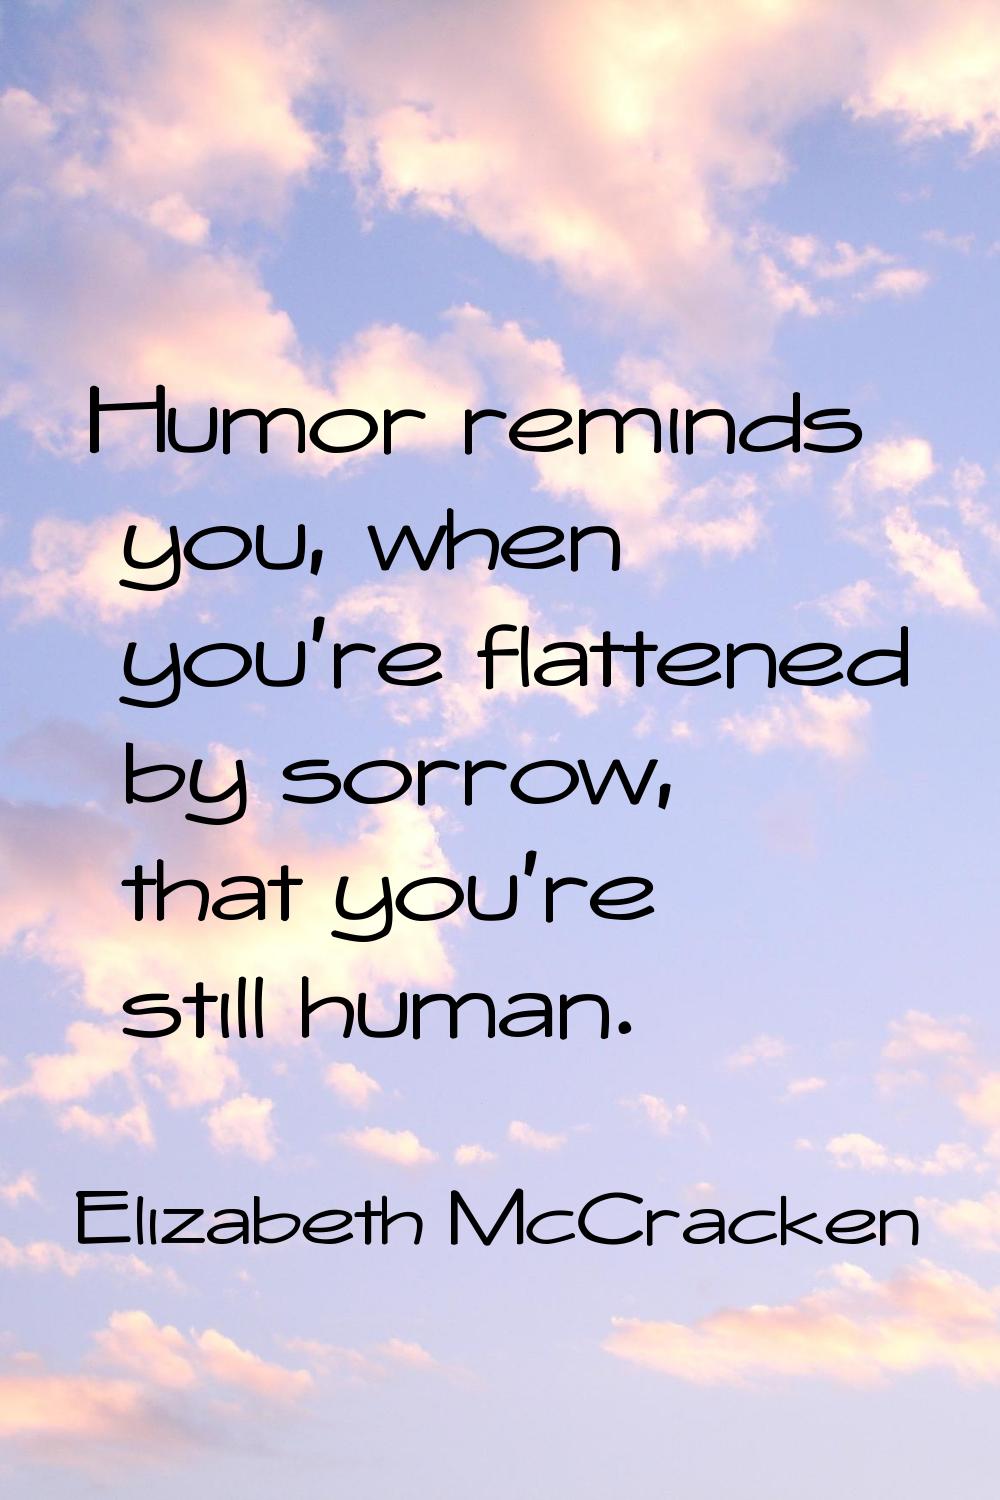 Humor reminds you, when you're flattened by sorrow, that you're still human.